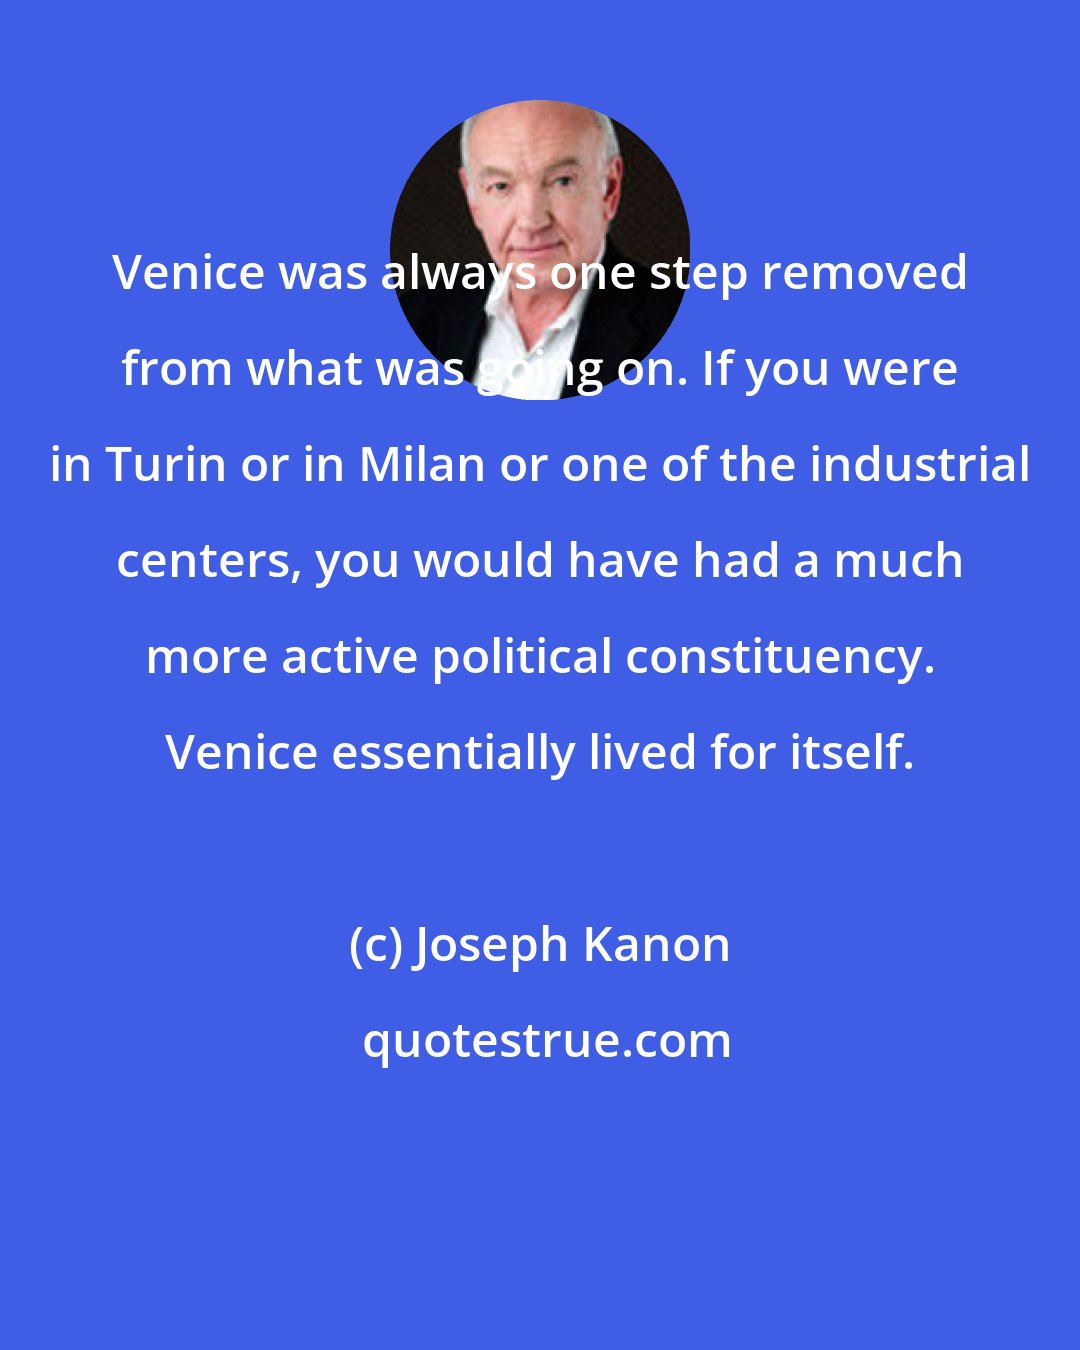 Joseph Kanon: Venice was always one step removed from what was going on. If you were in Turin or in Milan or one of the industrial centers, you would have had a much more active political constituency. Venice essentially lived for itself.